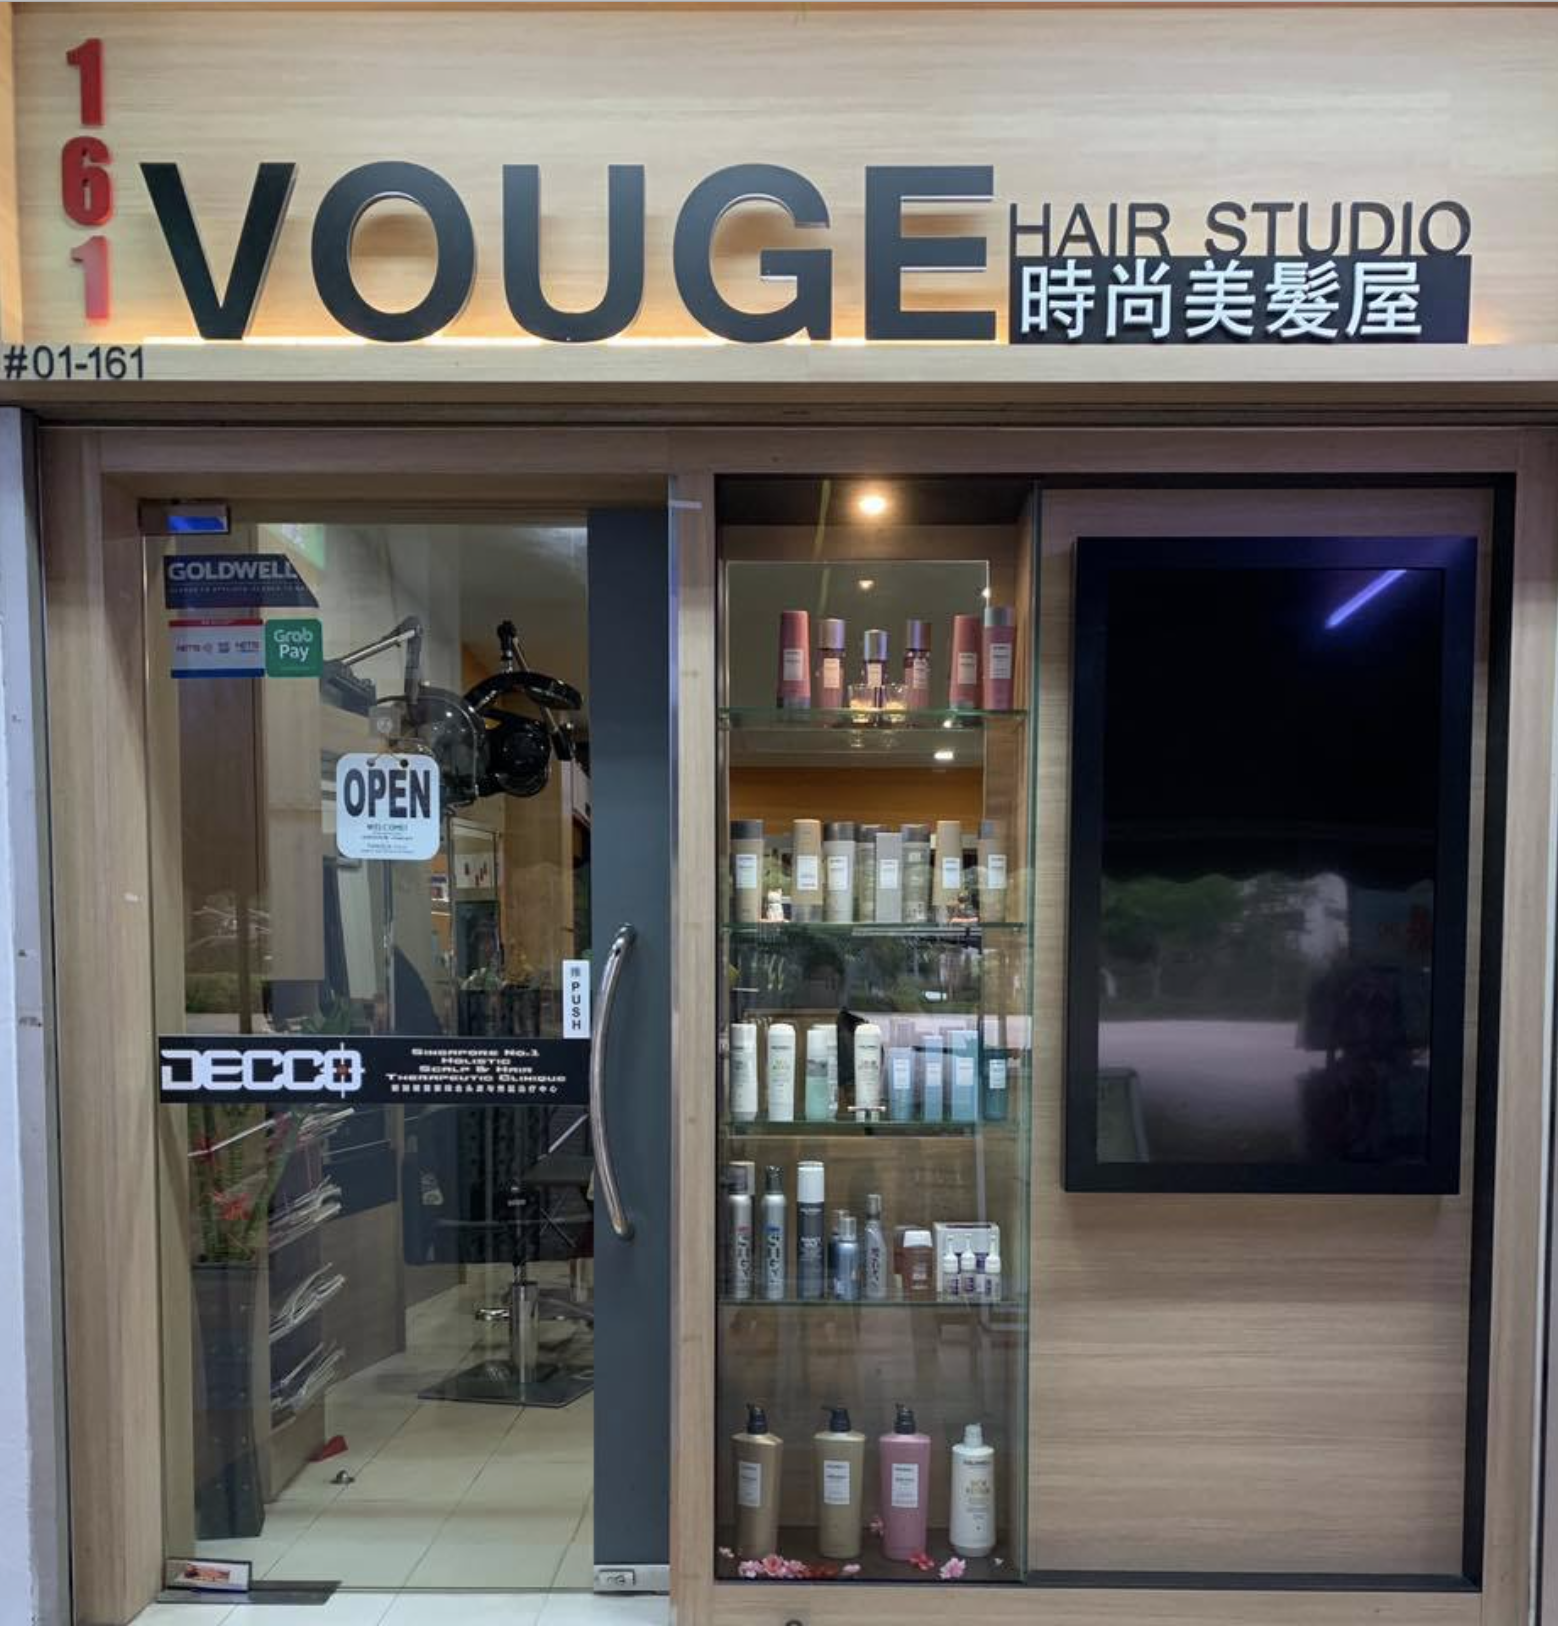 The store of 161 Vouge Hair Studio